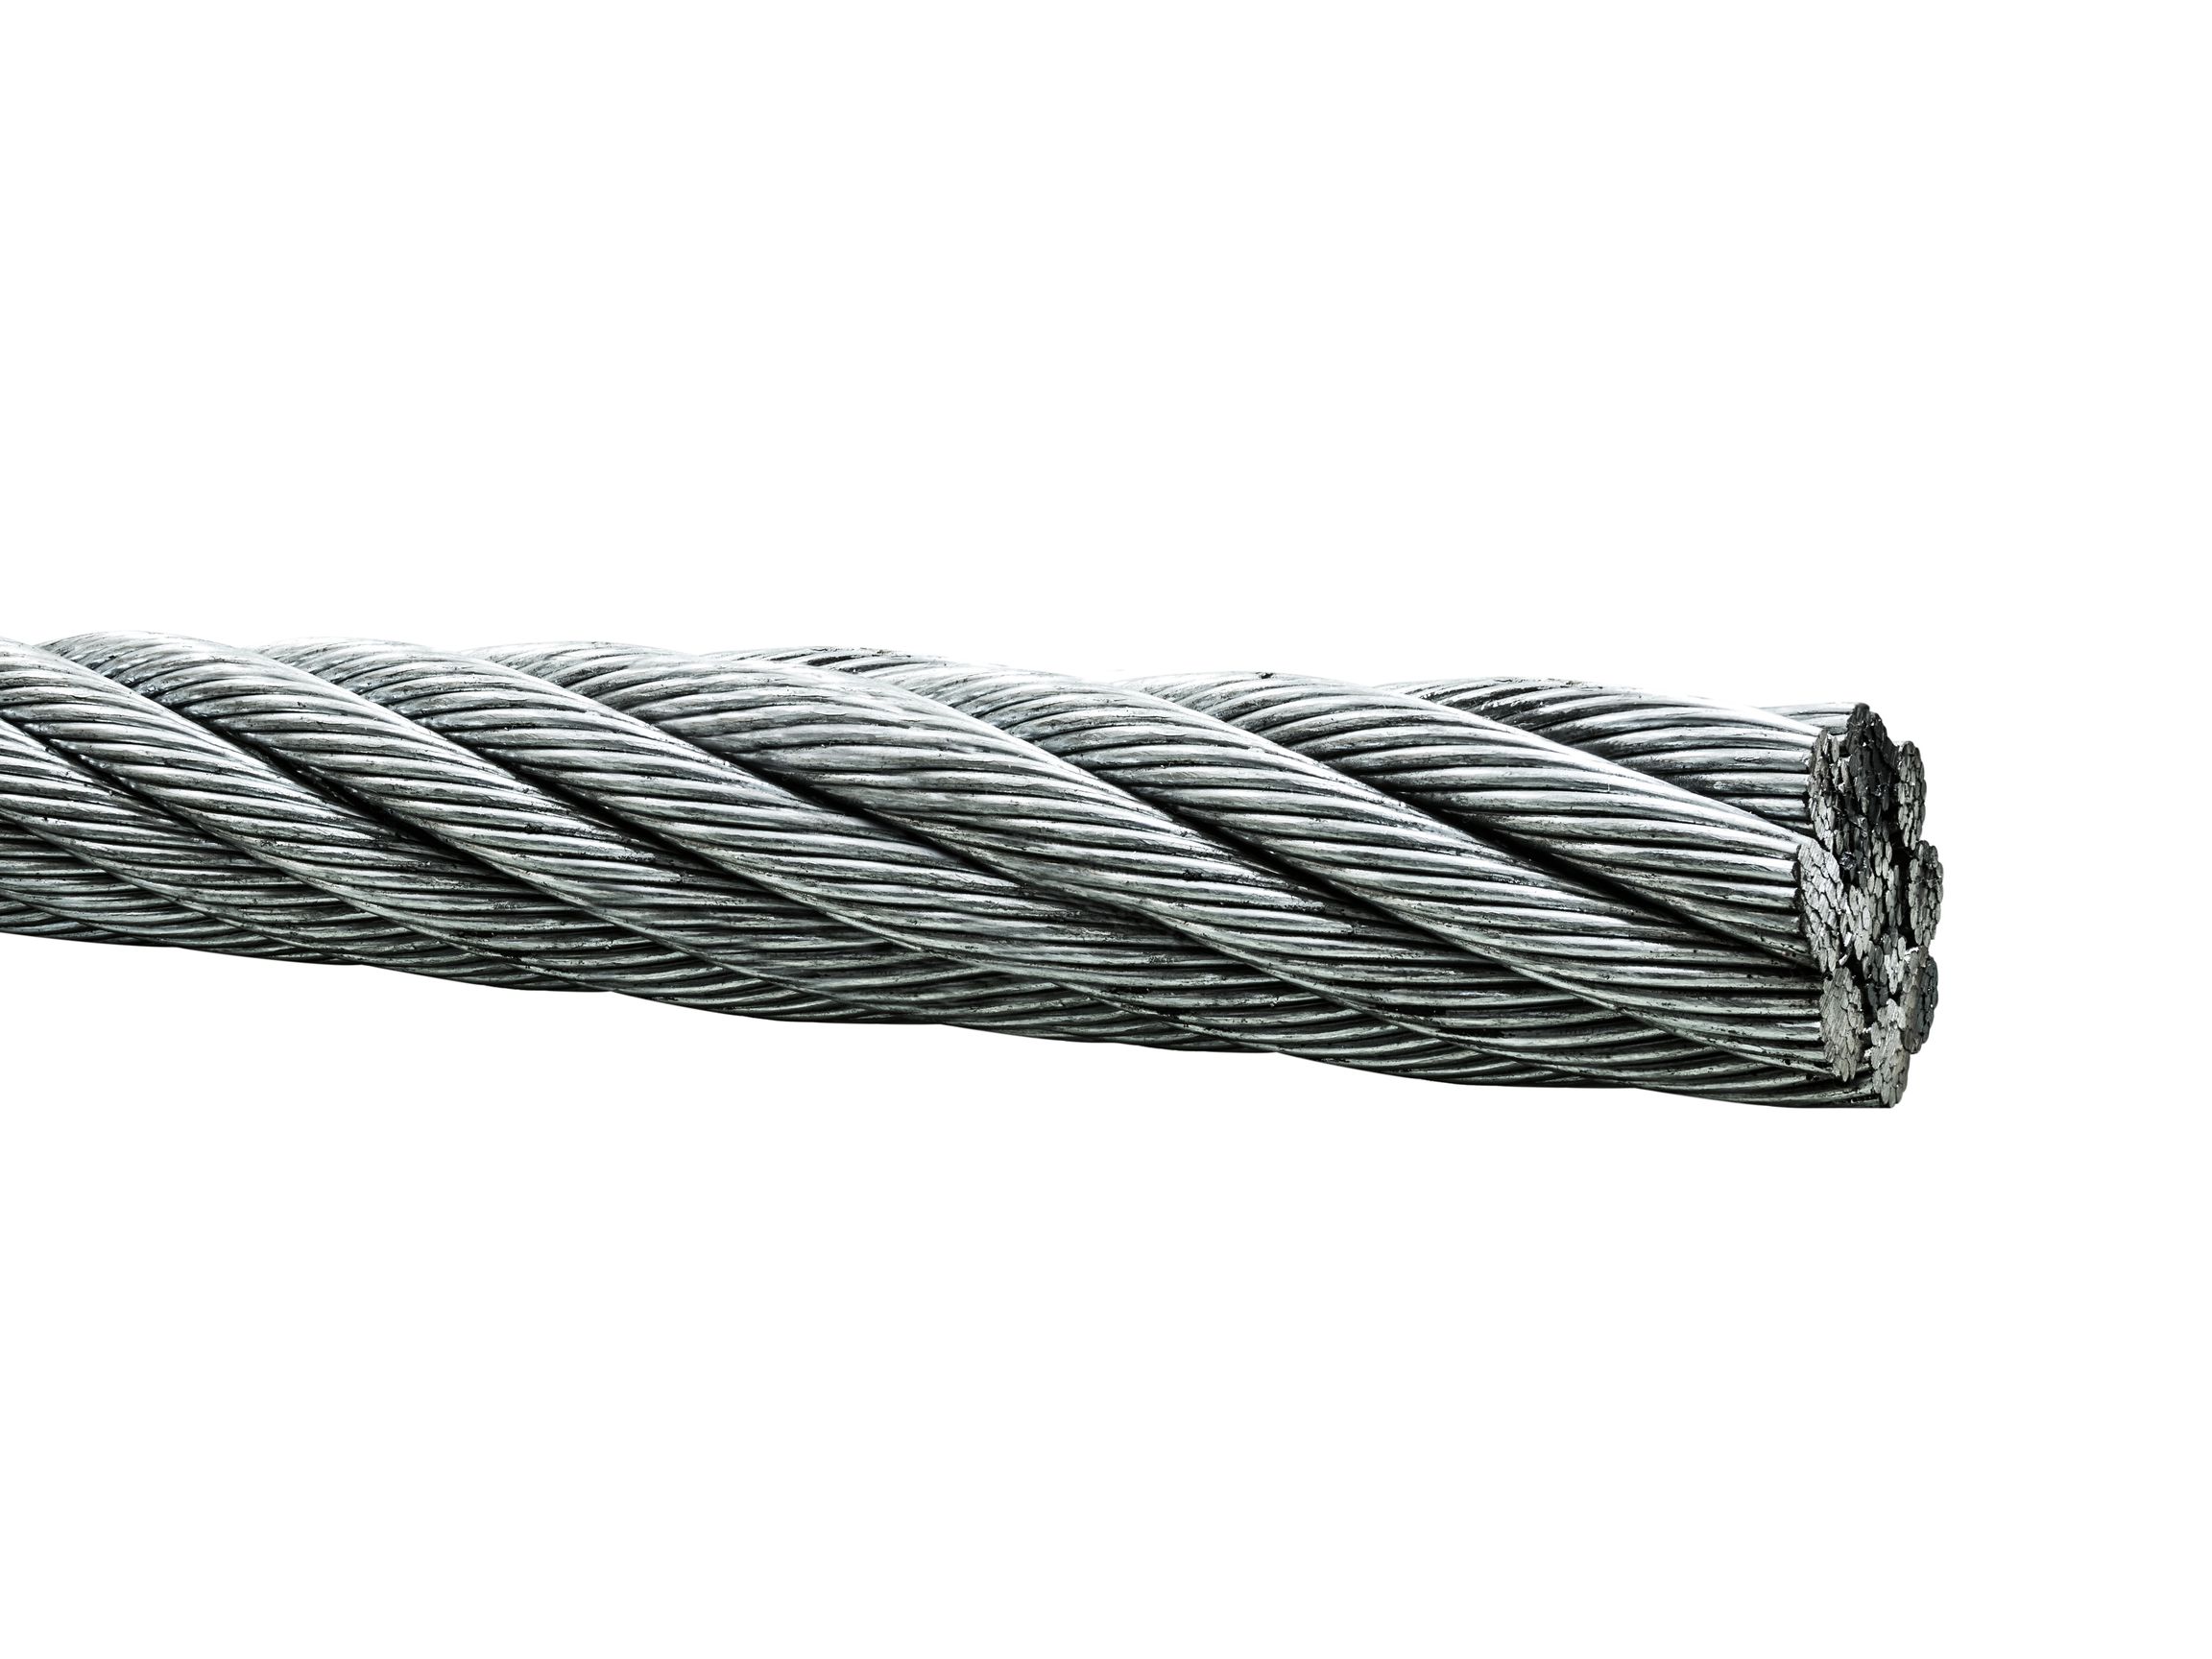 https://optimanufacturing.com/wp-content/uploads/2018/06/wire-rope.jpeg